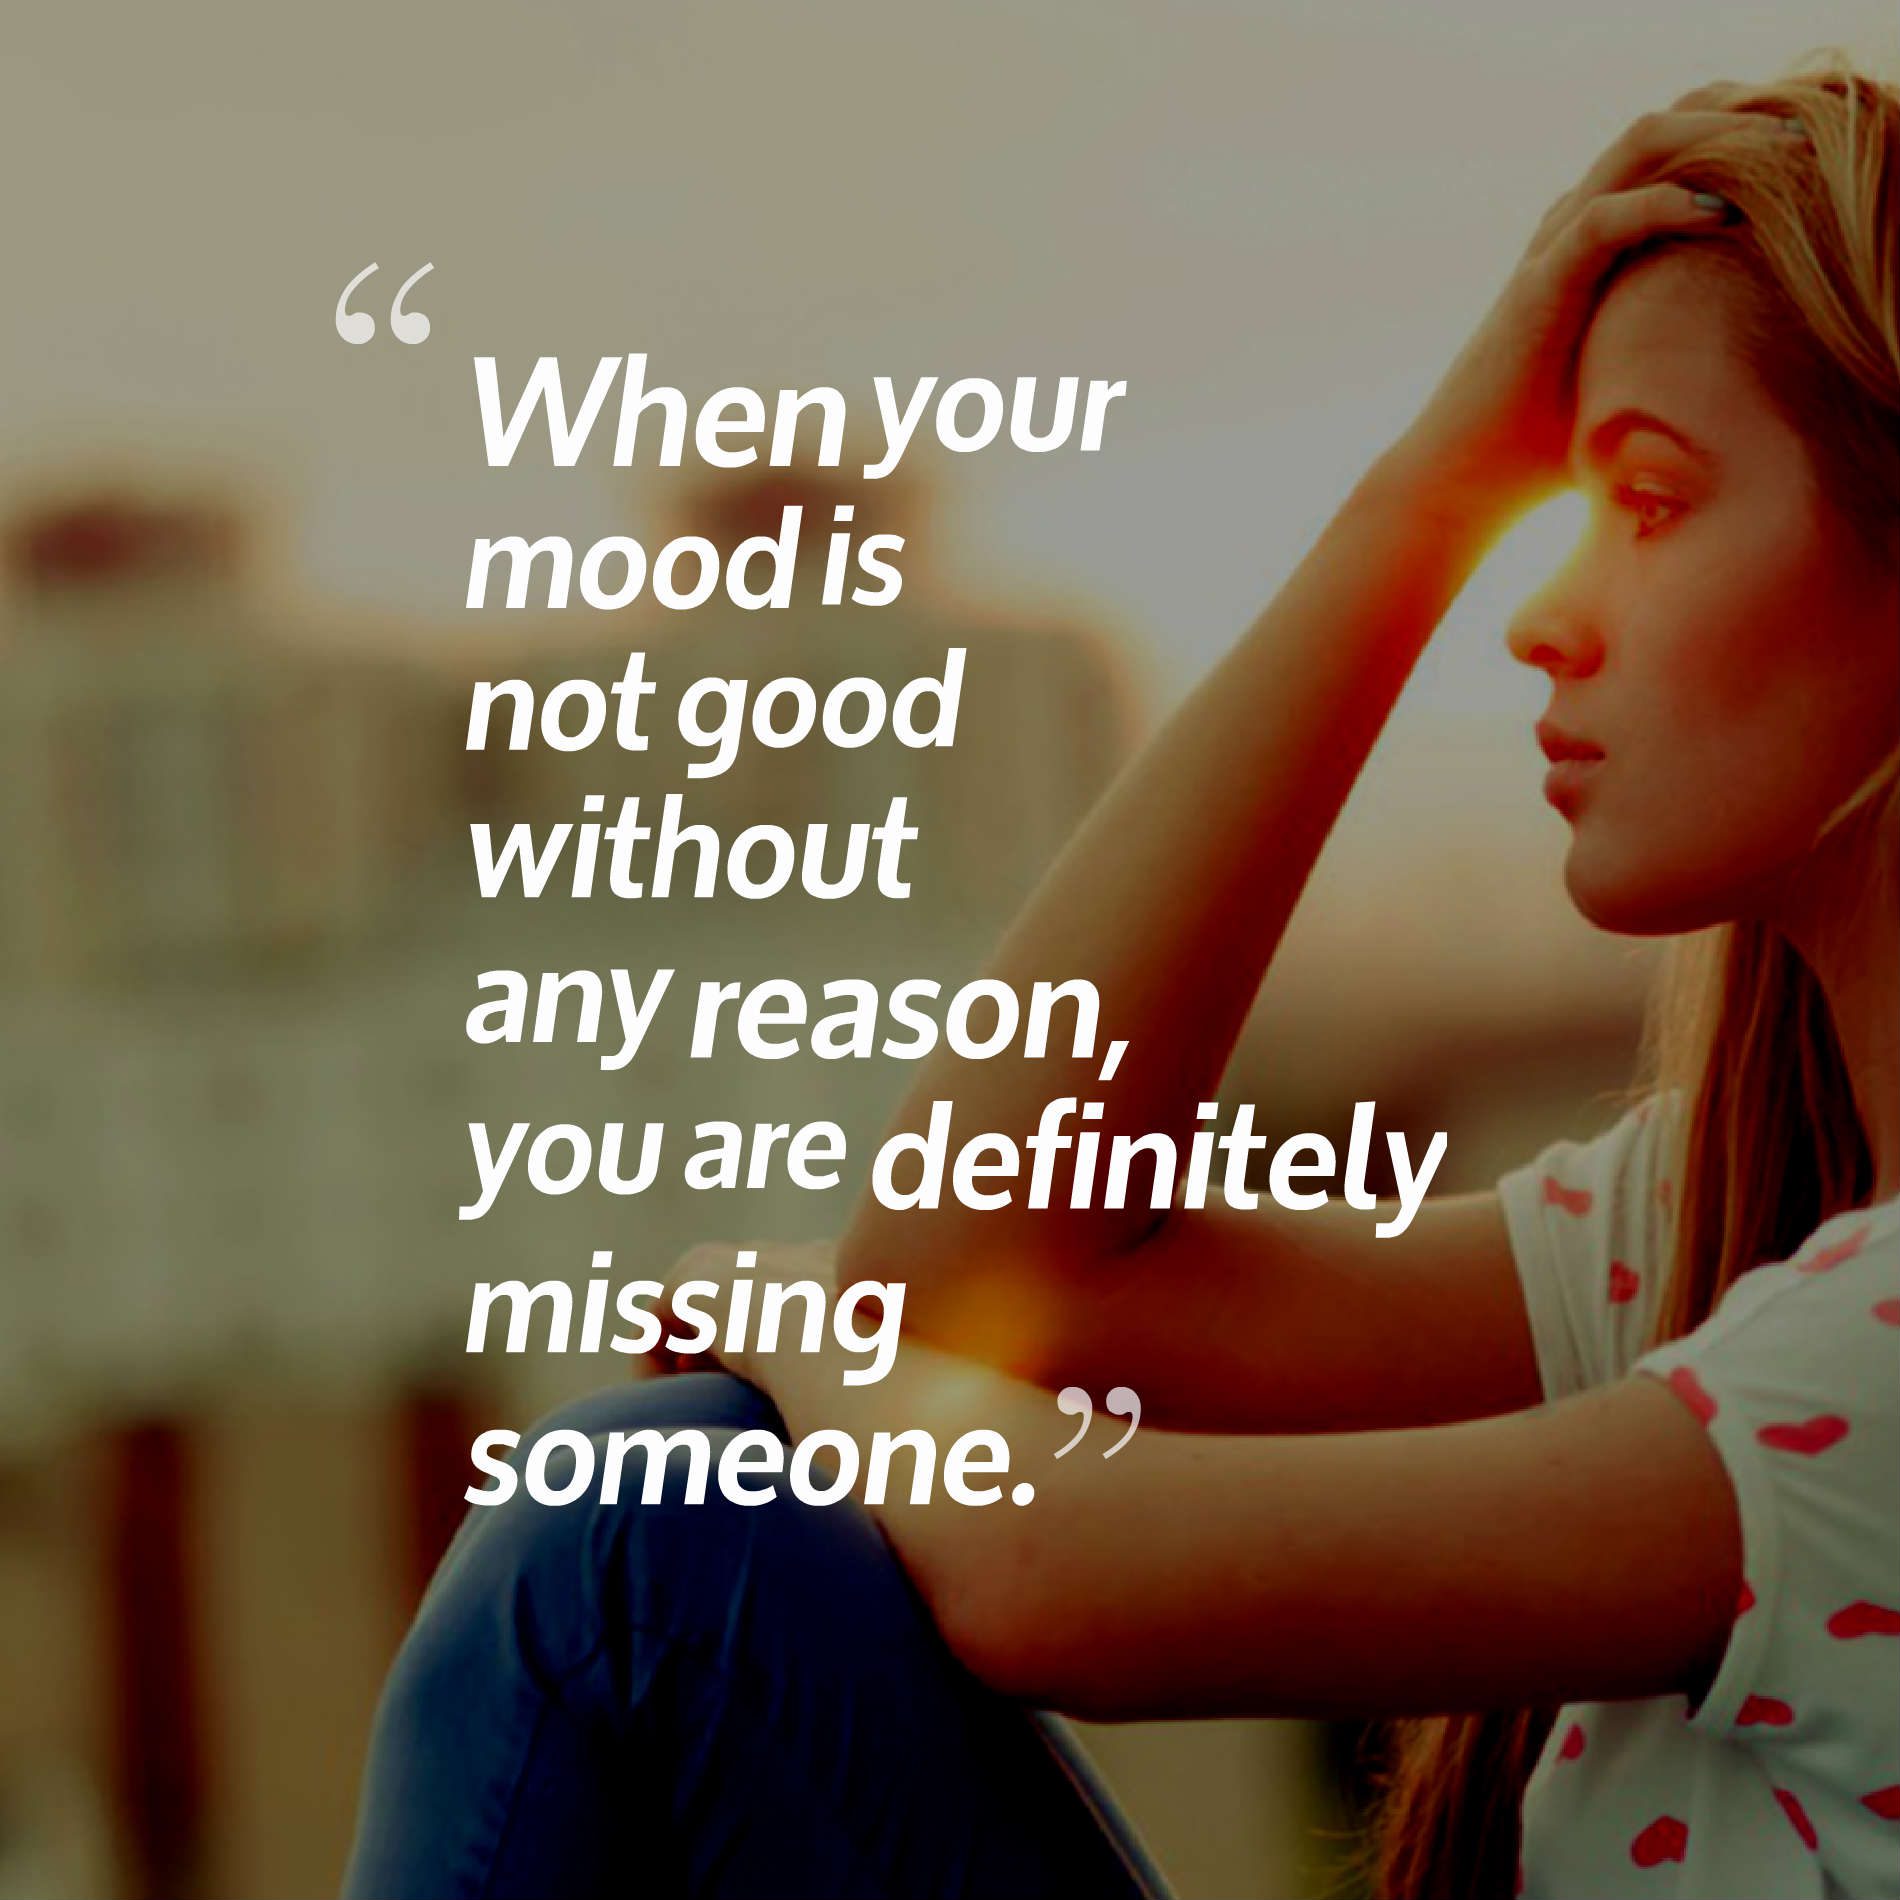 When your mood is not good without any reason, you are definitely missing someone